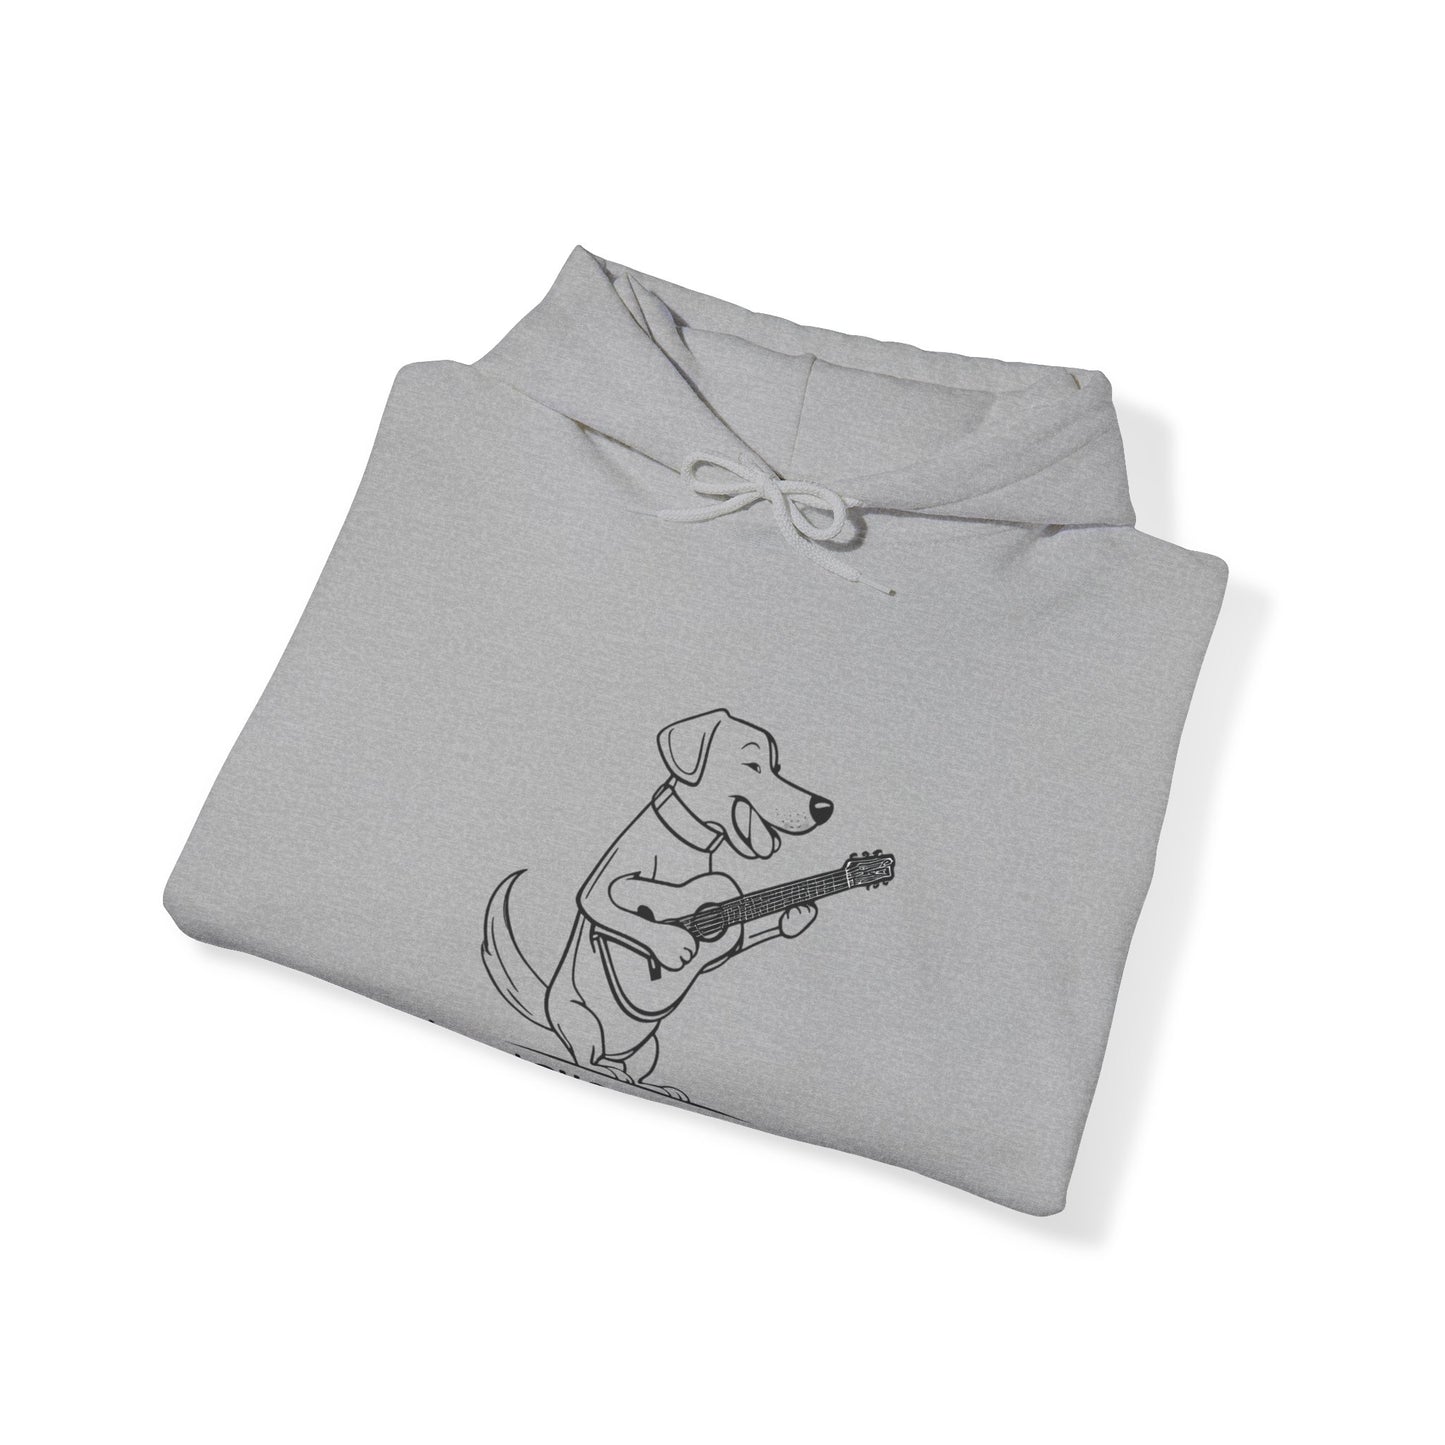 Dog With Guitar. Live, Love and Laugh. Unisex Hooded Sweatshirt.